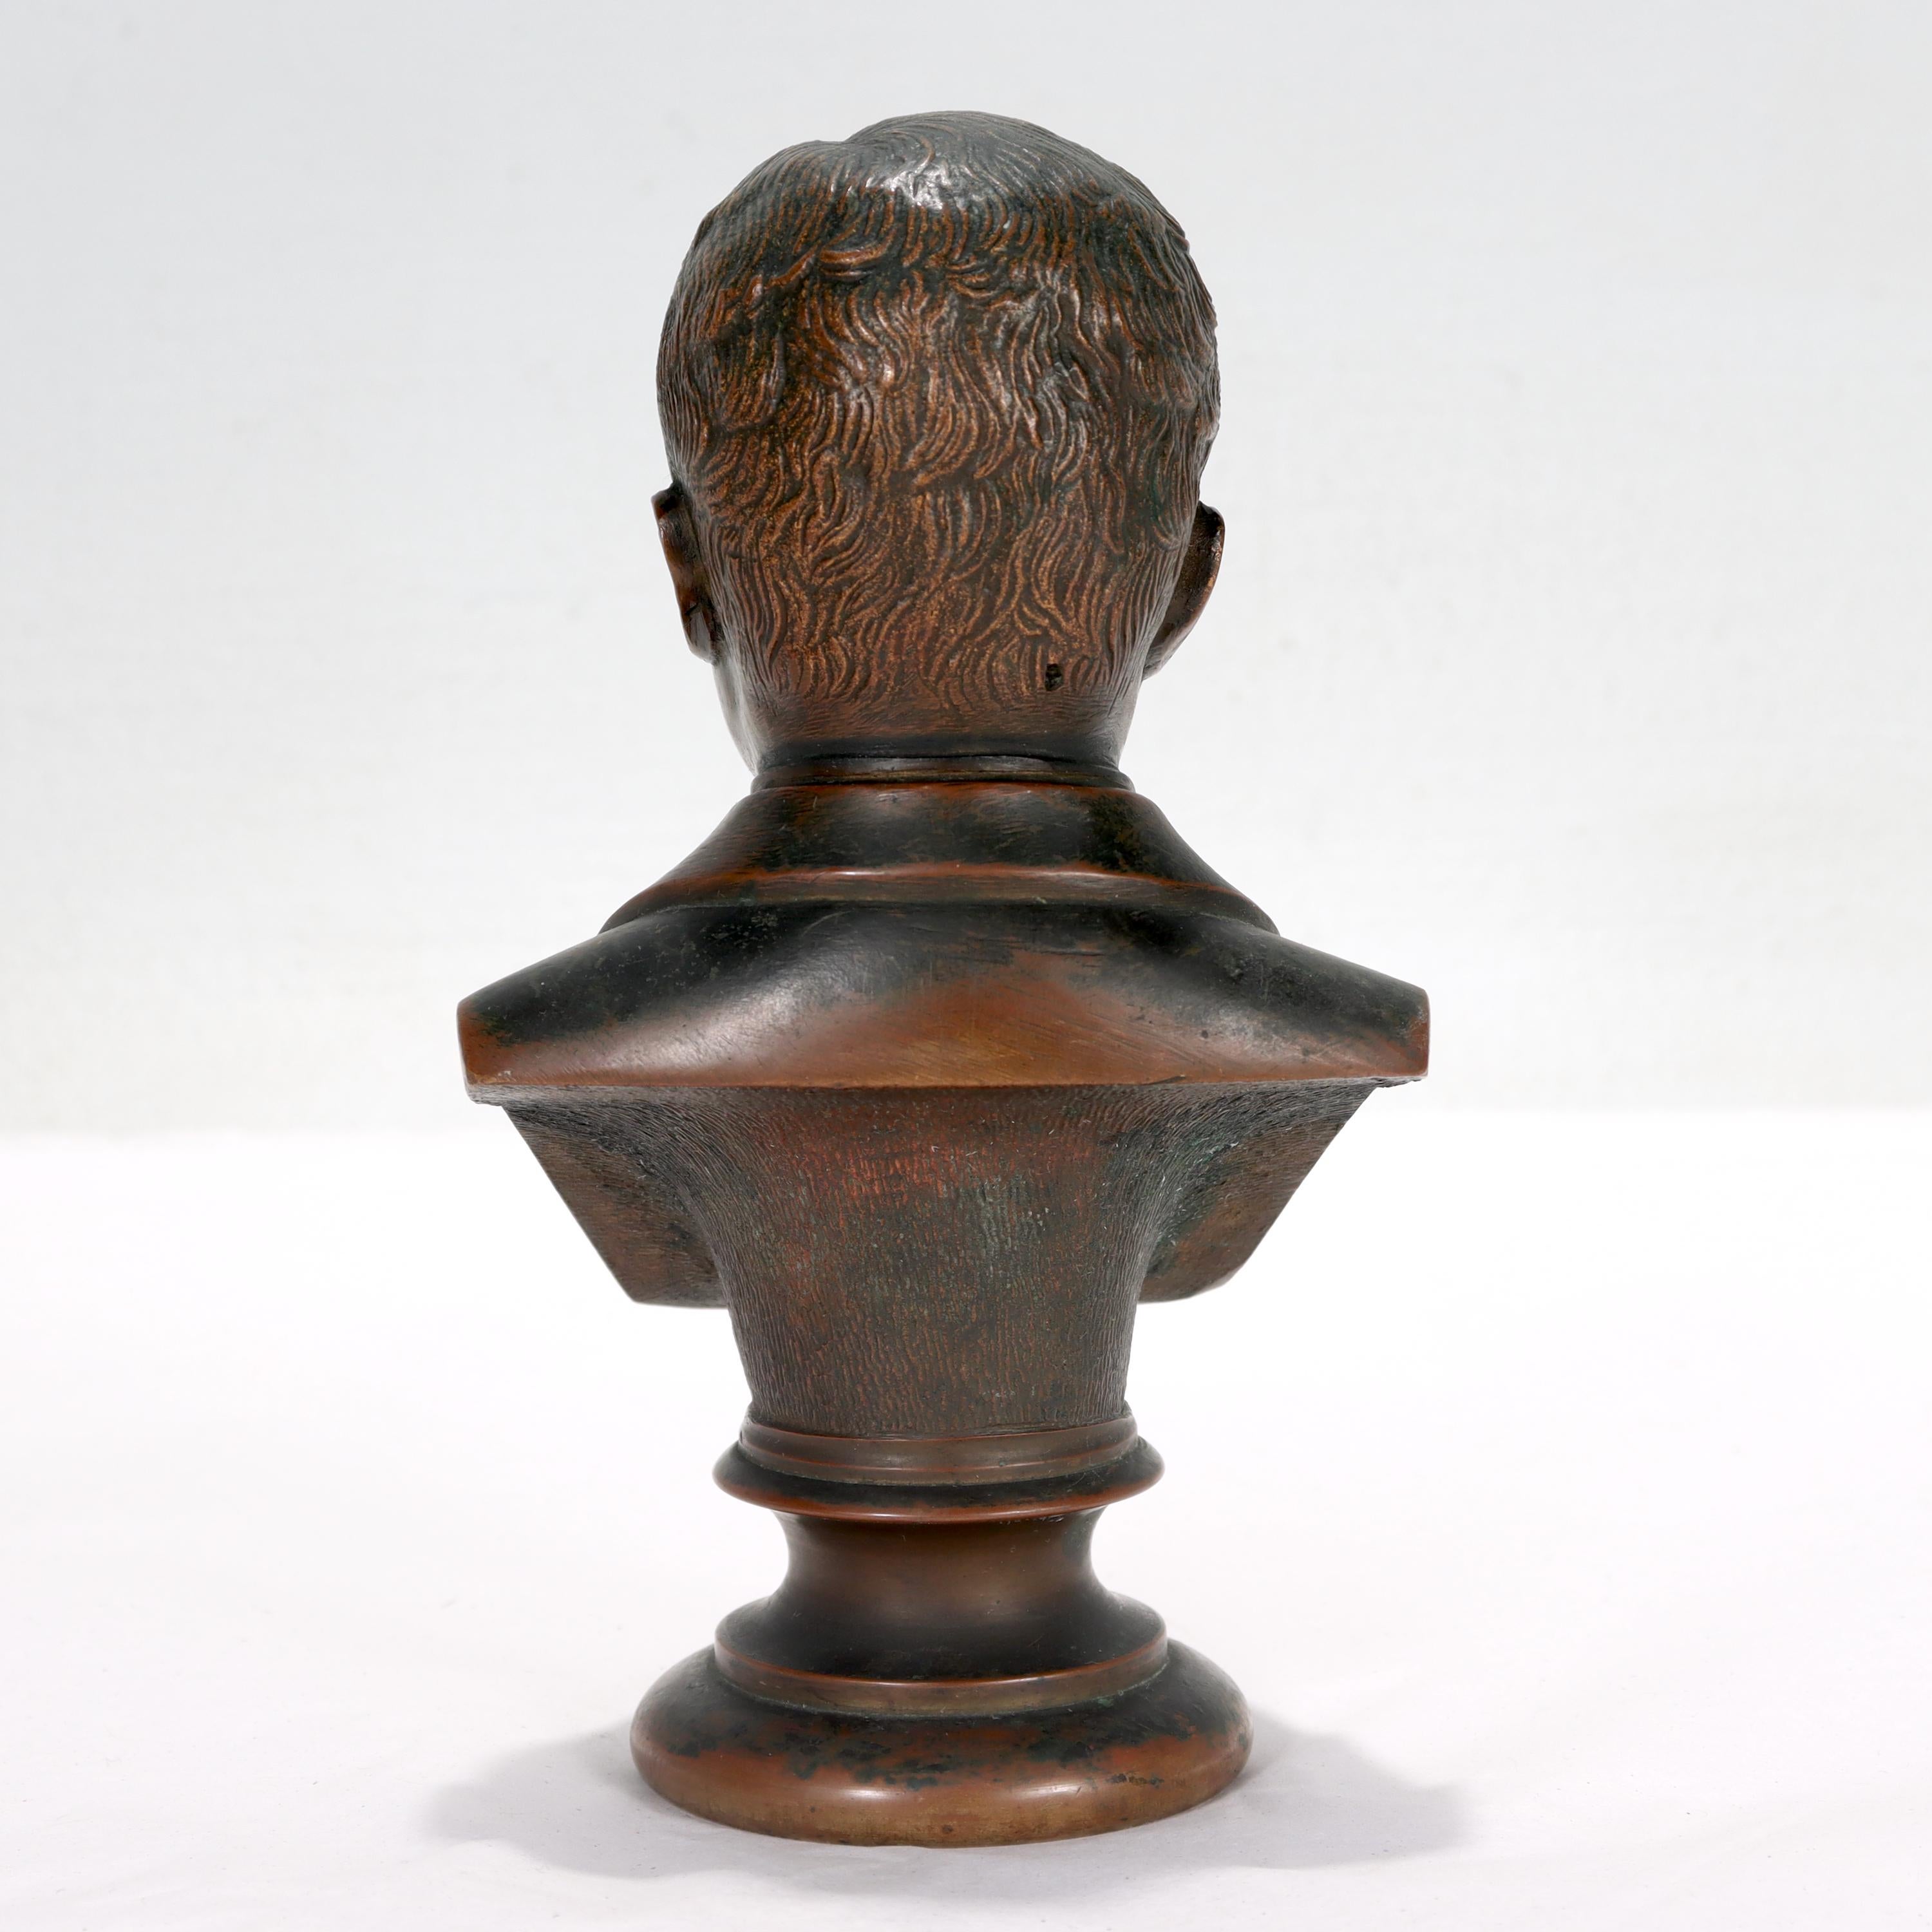 American Small Desk or Cabinet Sized Bronze Bust of President Theodore 'Teddy' Roosevelt